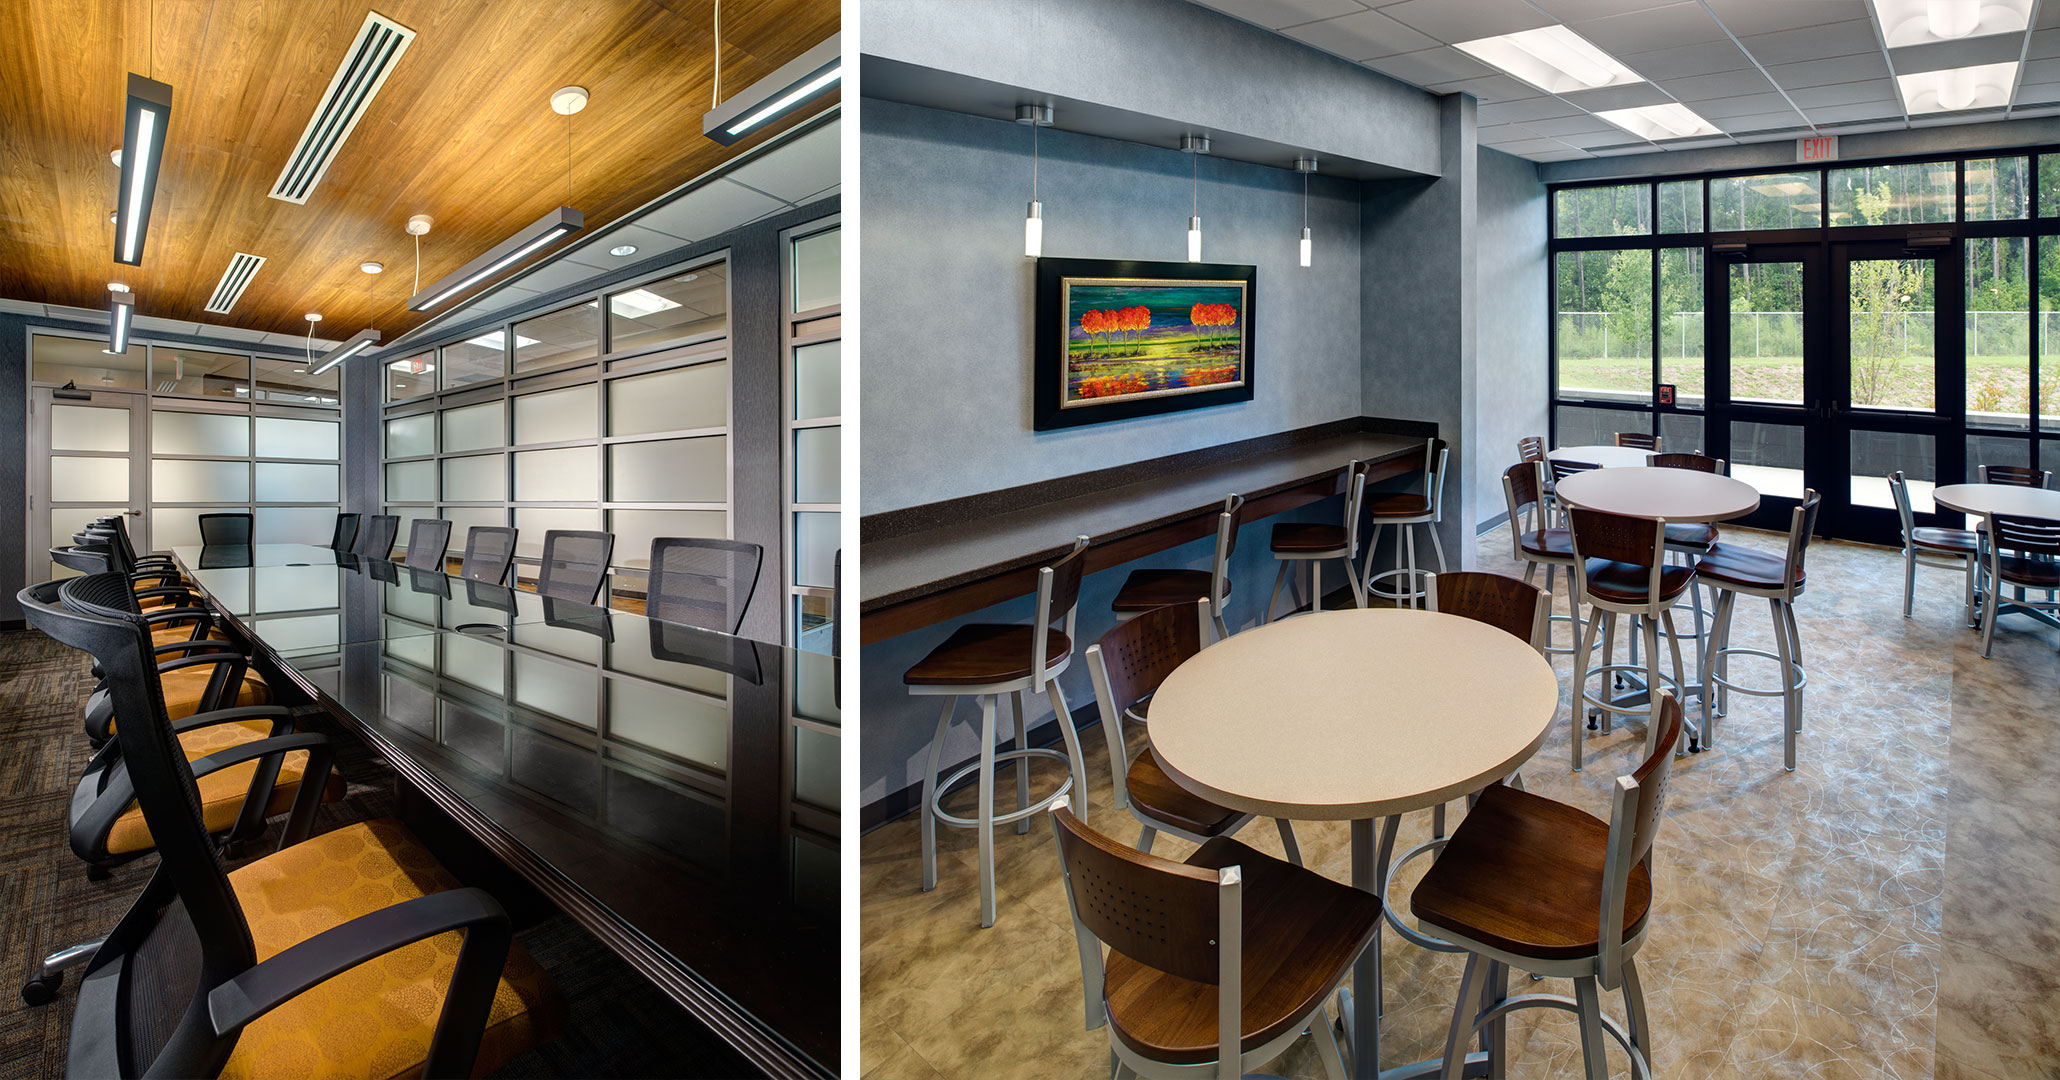 Boudreaux architects worked with the Richland County Recreation Commission to design the interior conference space and cafeteria area at the RCRC Headquarters.